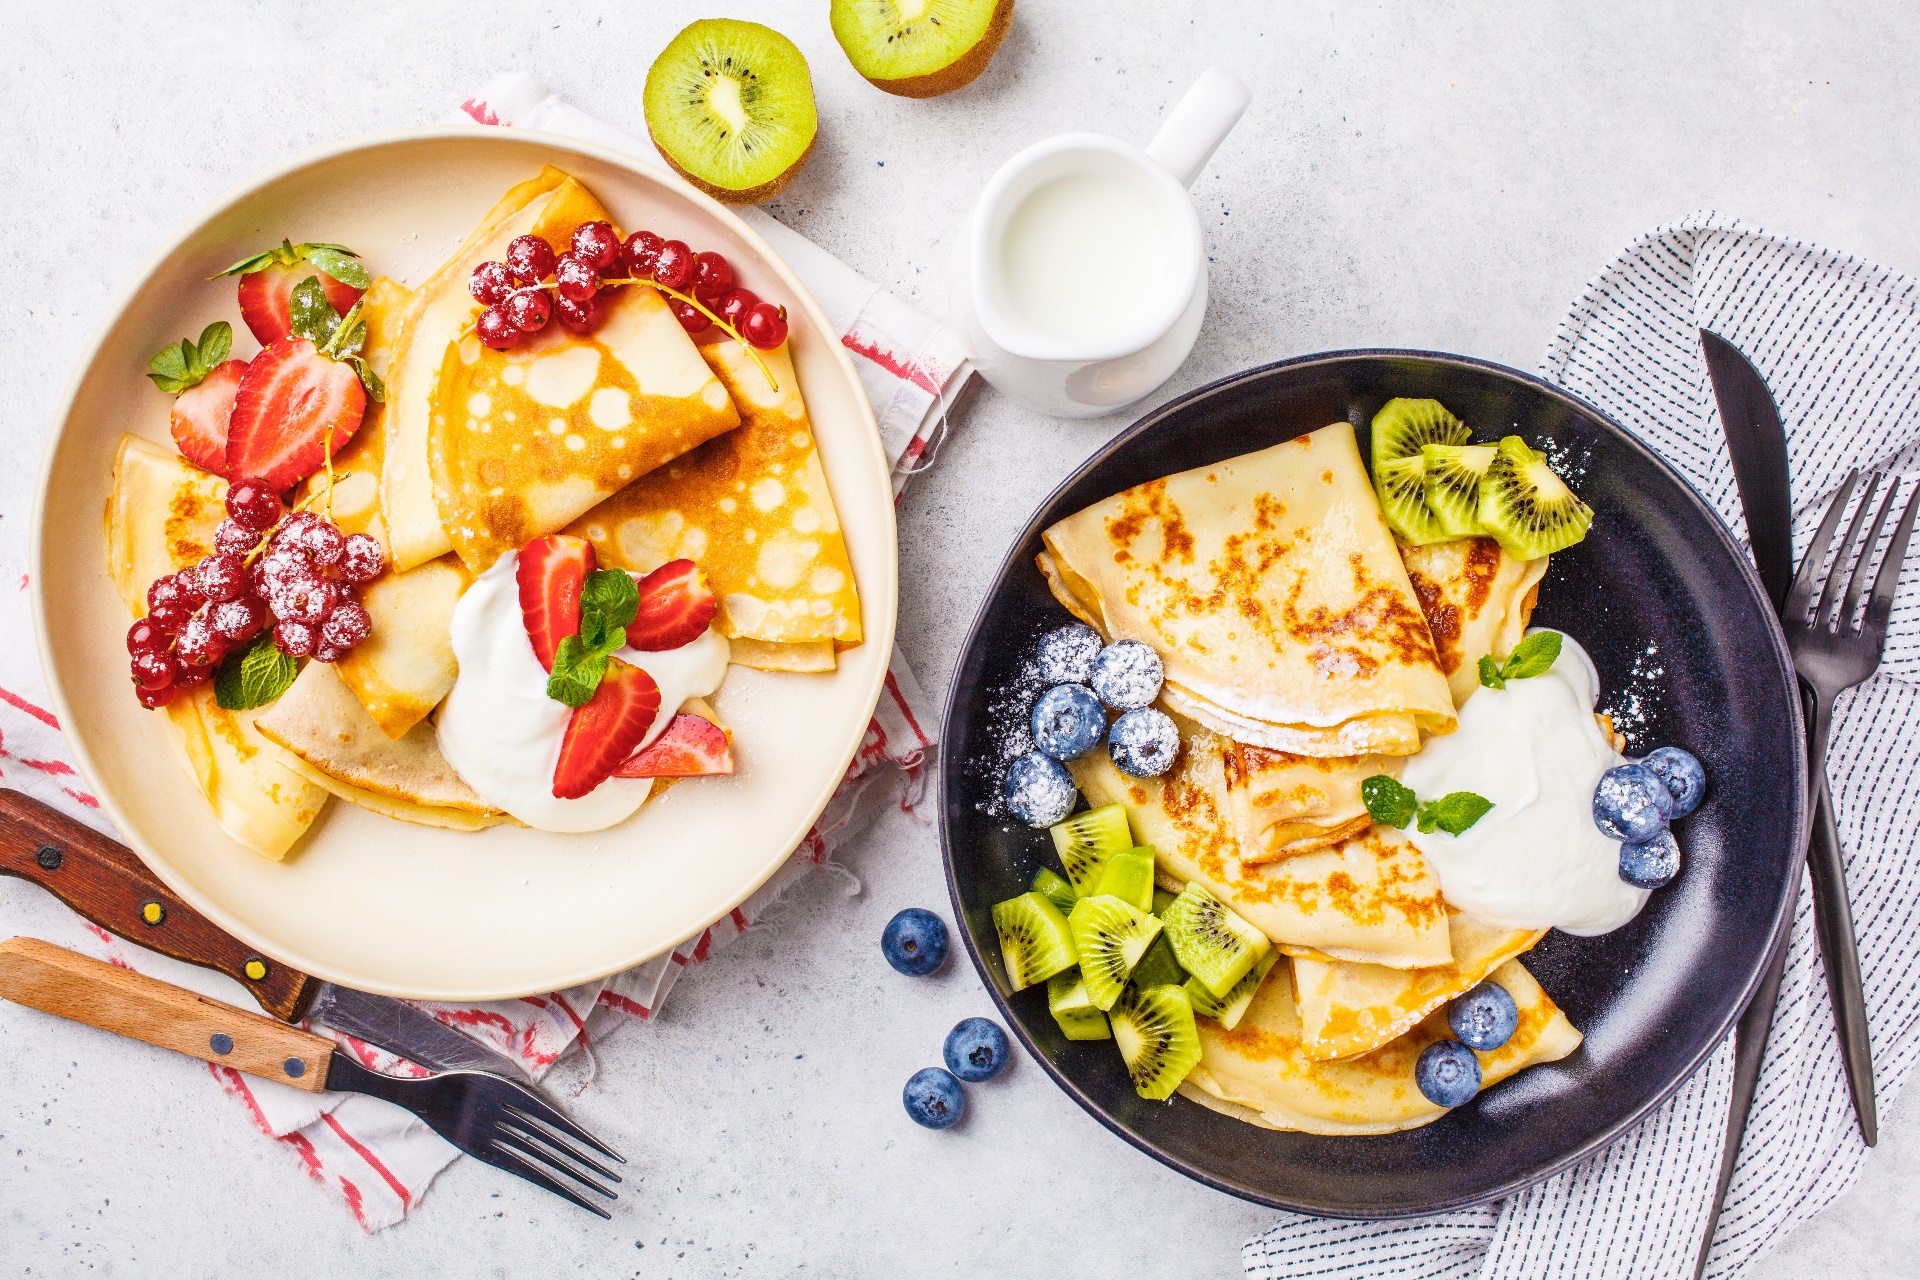 Food Fruit Strawberries Sweets Crepes Kiwi Fruit Blueberries Red Currant Sugar Fork Table Knife 1920x1280